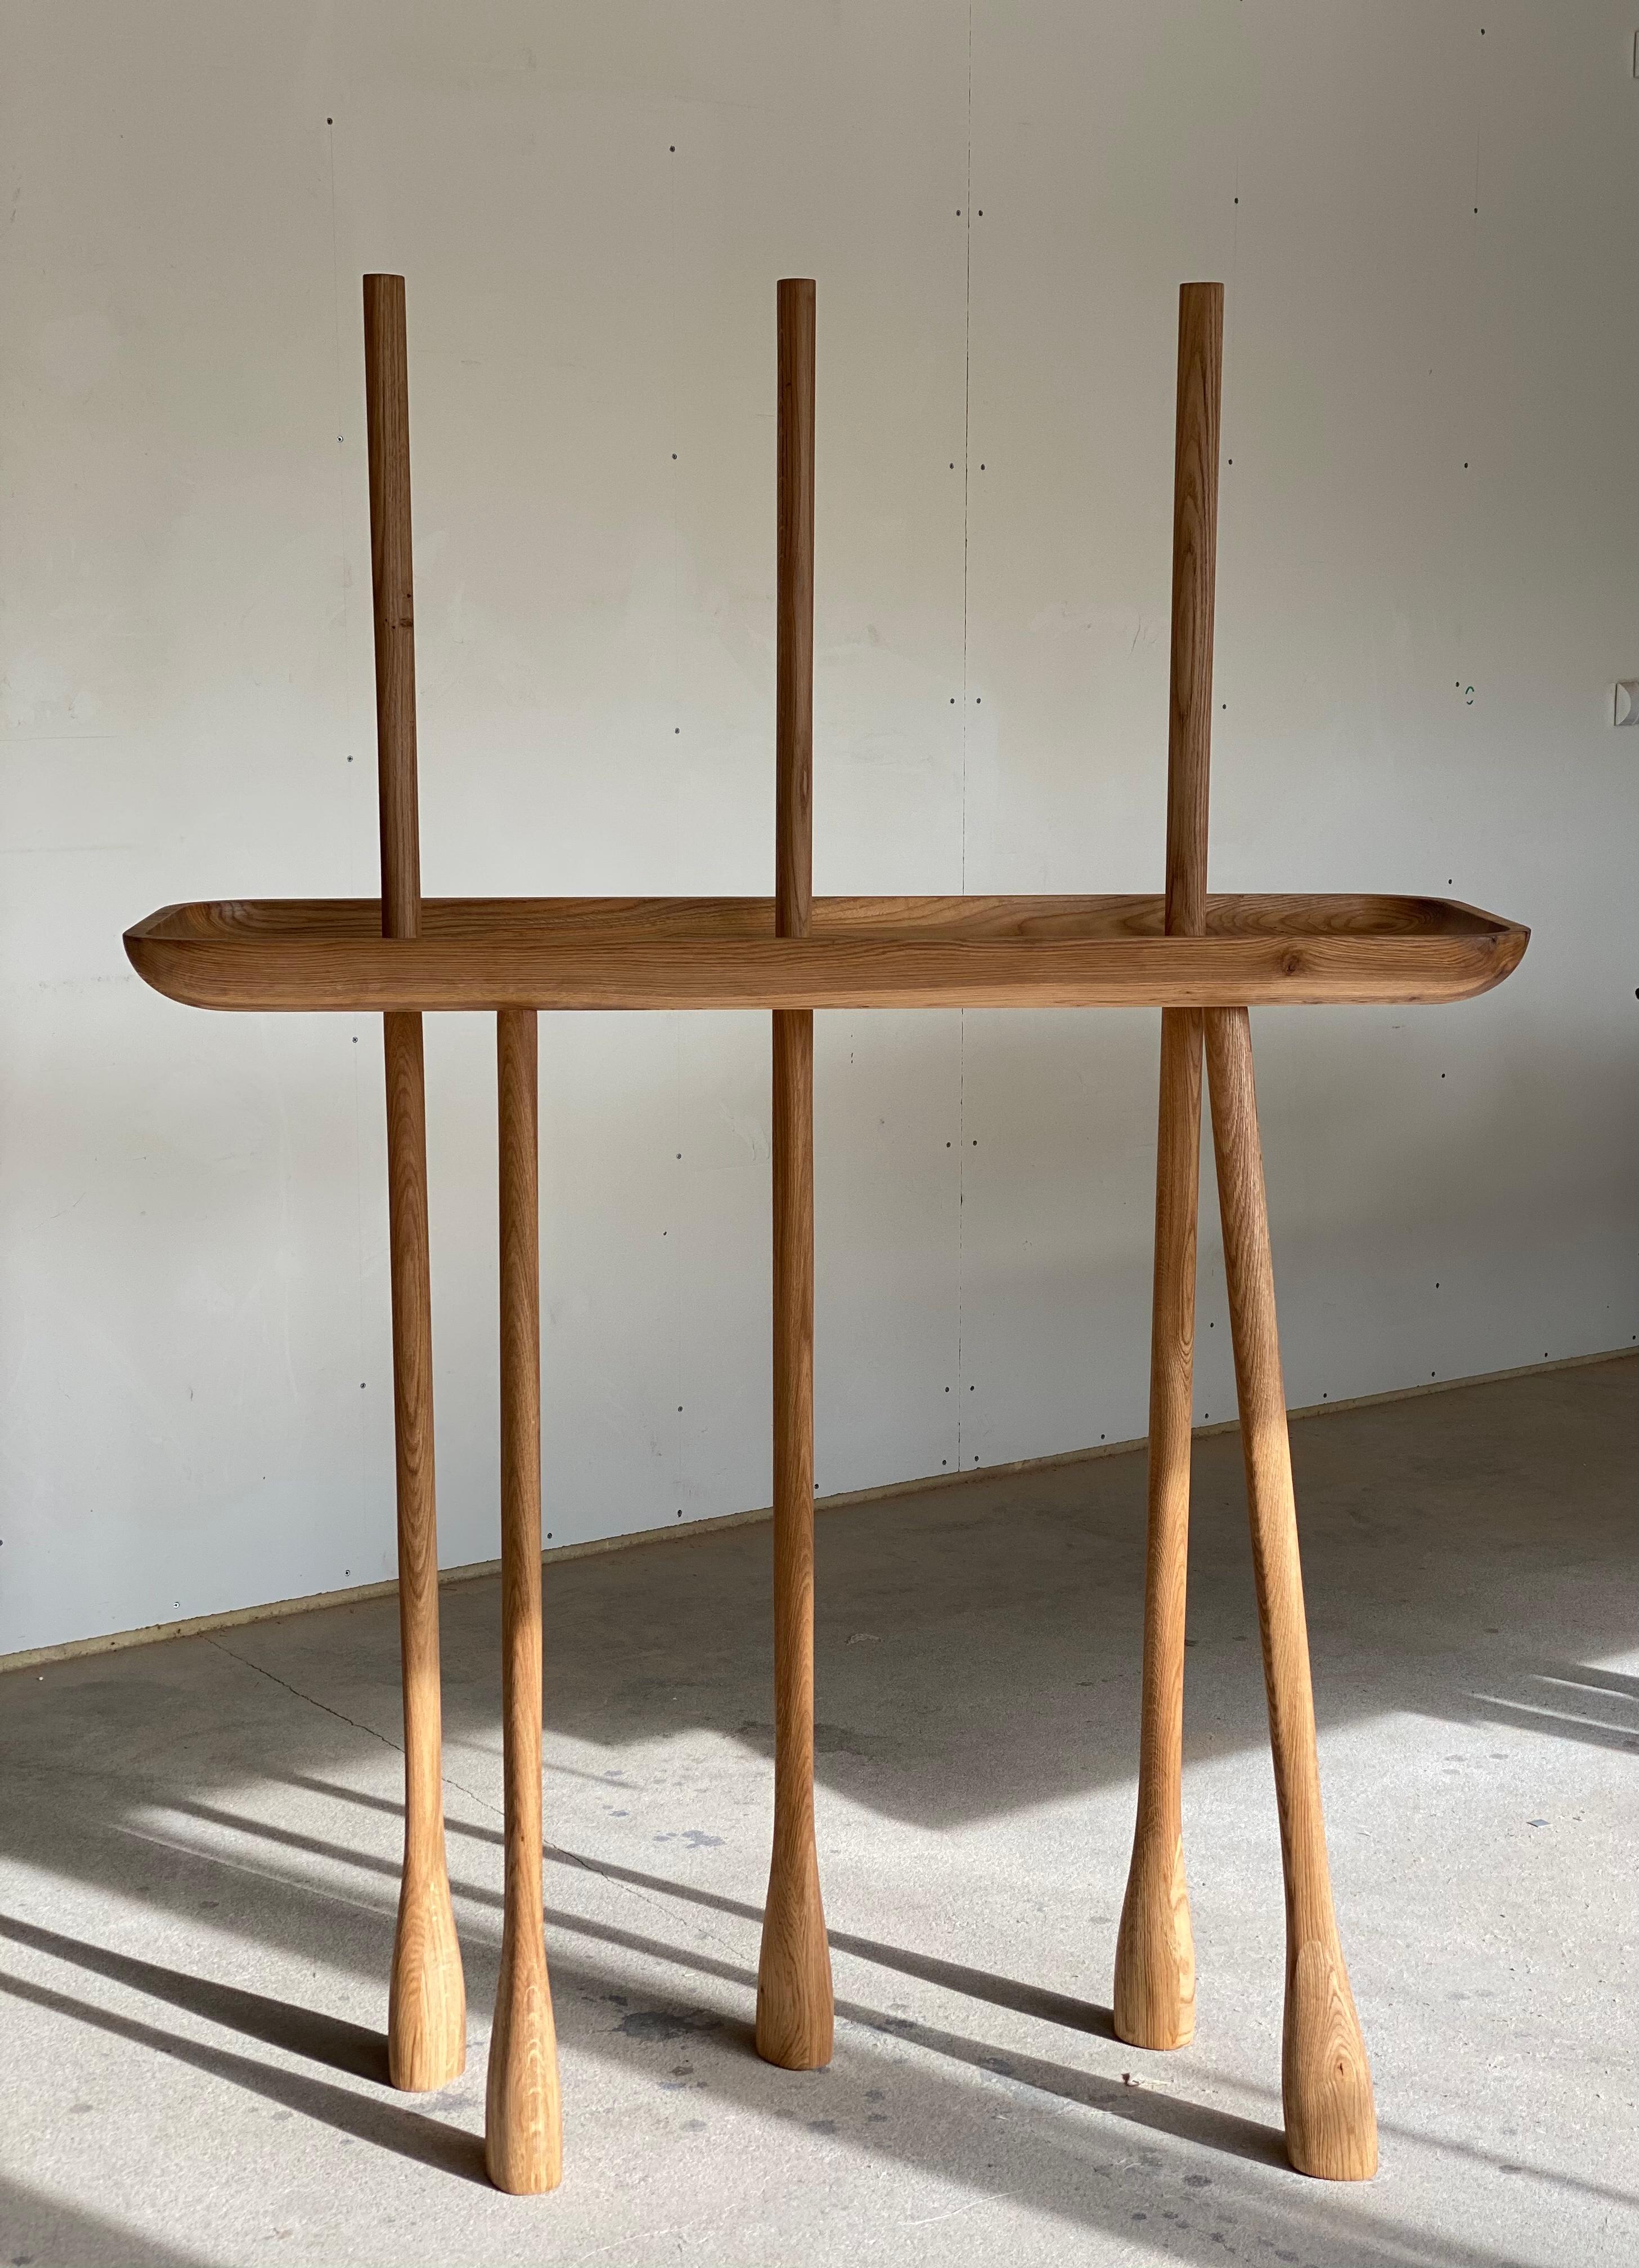 CHARLOTTE collection of collectible design objects inspired by poetic design of renowned French designer Charlotte Perriand.  Minimalistic and ironic tables and consoles are made of oiled warm oak wood. 

Olga Engel: “I have always been inspired by